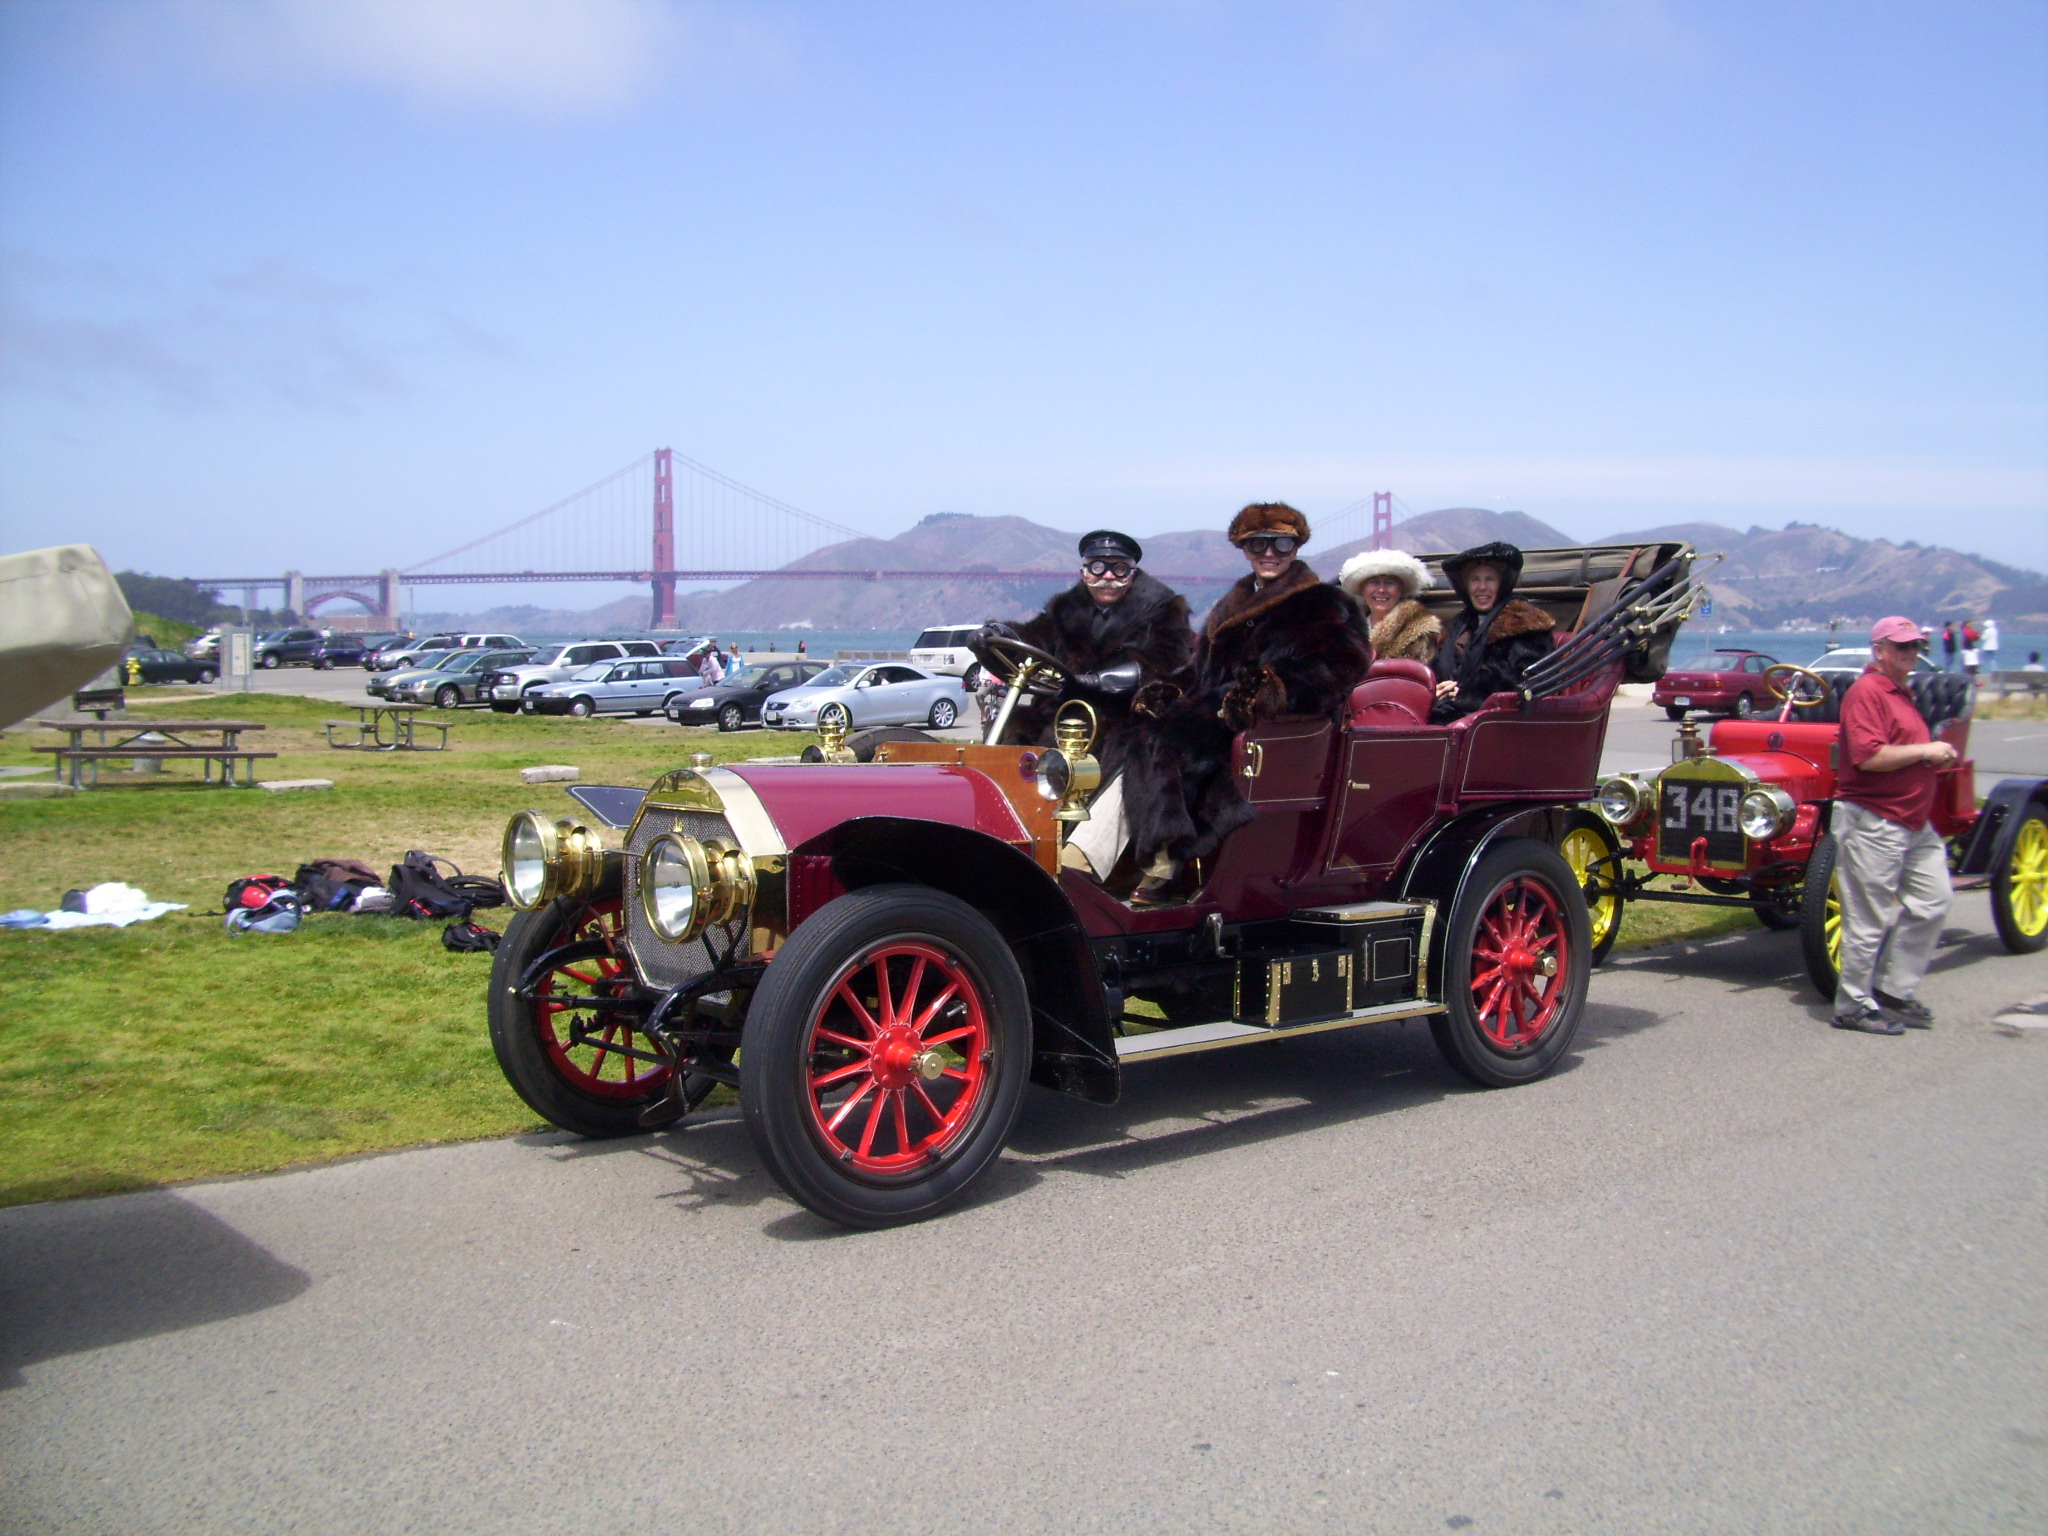 At the Alice Ramsey centennial tour in the Archer's 1906 Locomobile Crissy Field, San Francisco, 2009